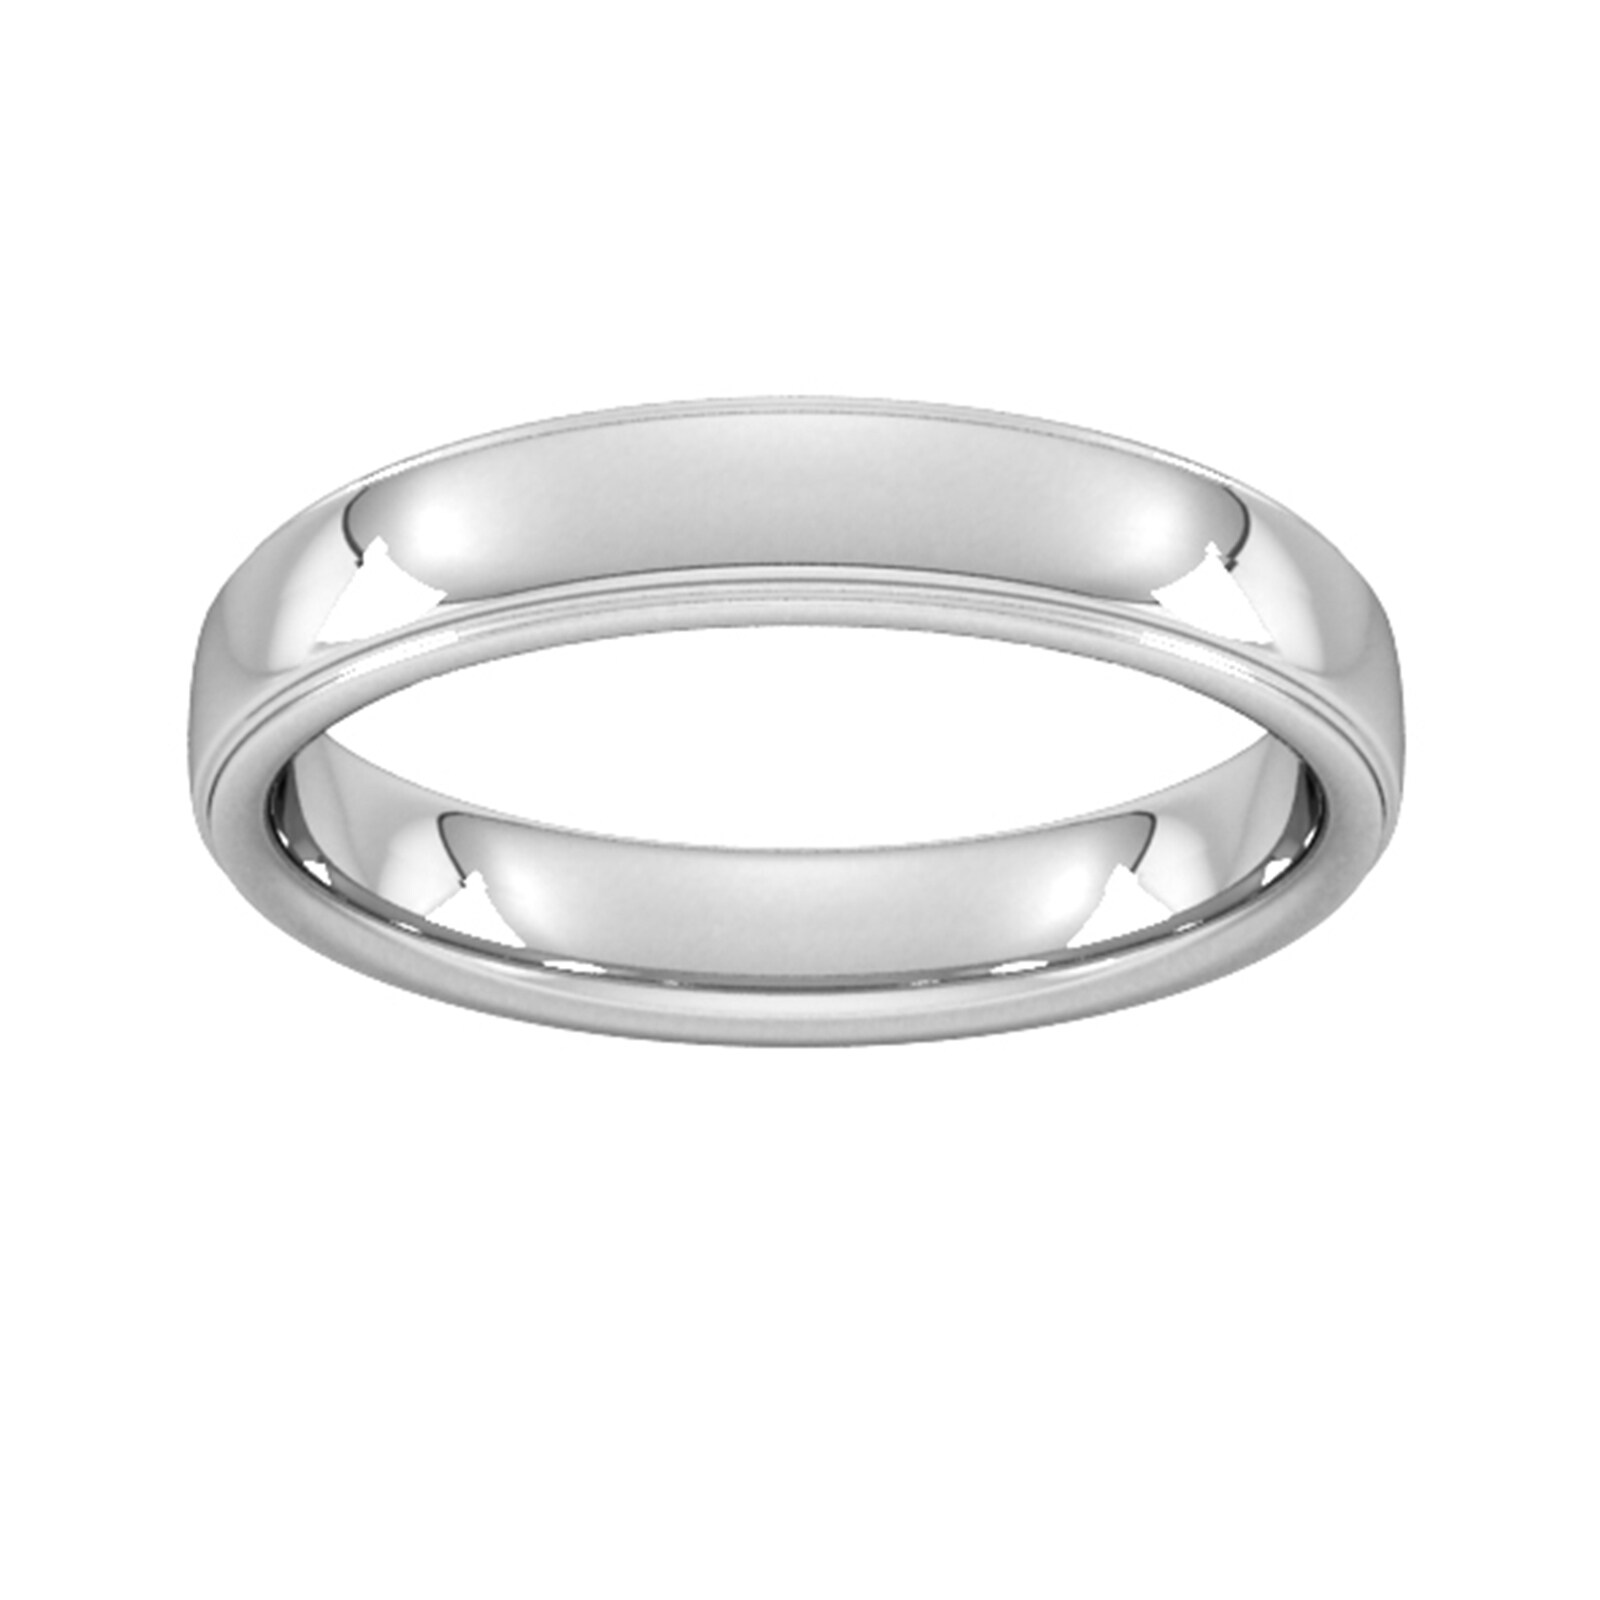 4mm Slight Court Heavy Polished Finish With Grooves Wedding Ring In 950 Palladium - Ring Size O